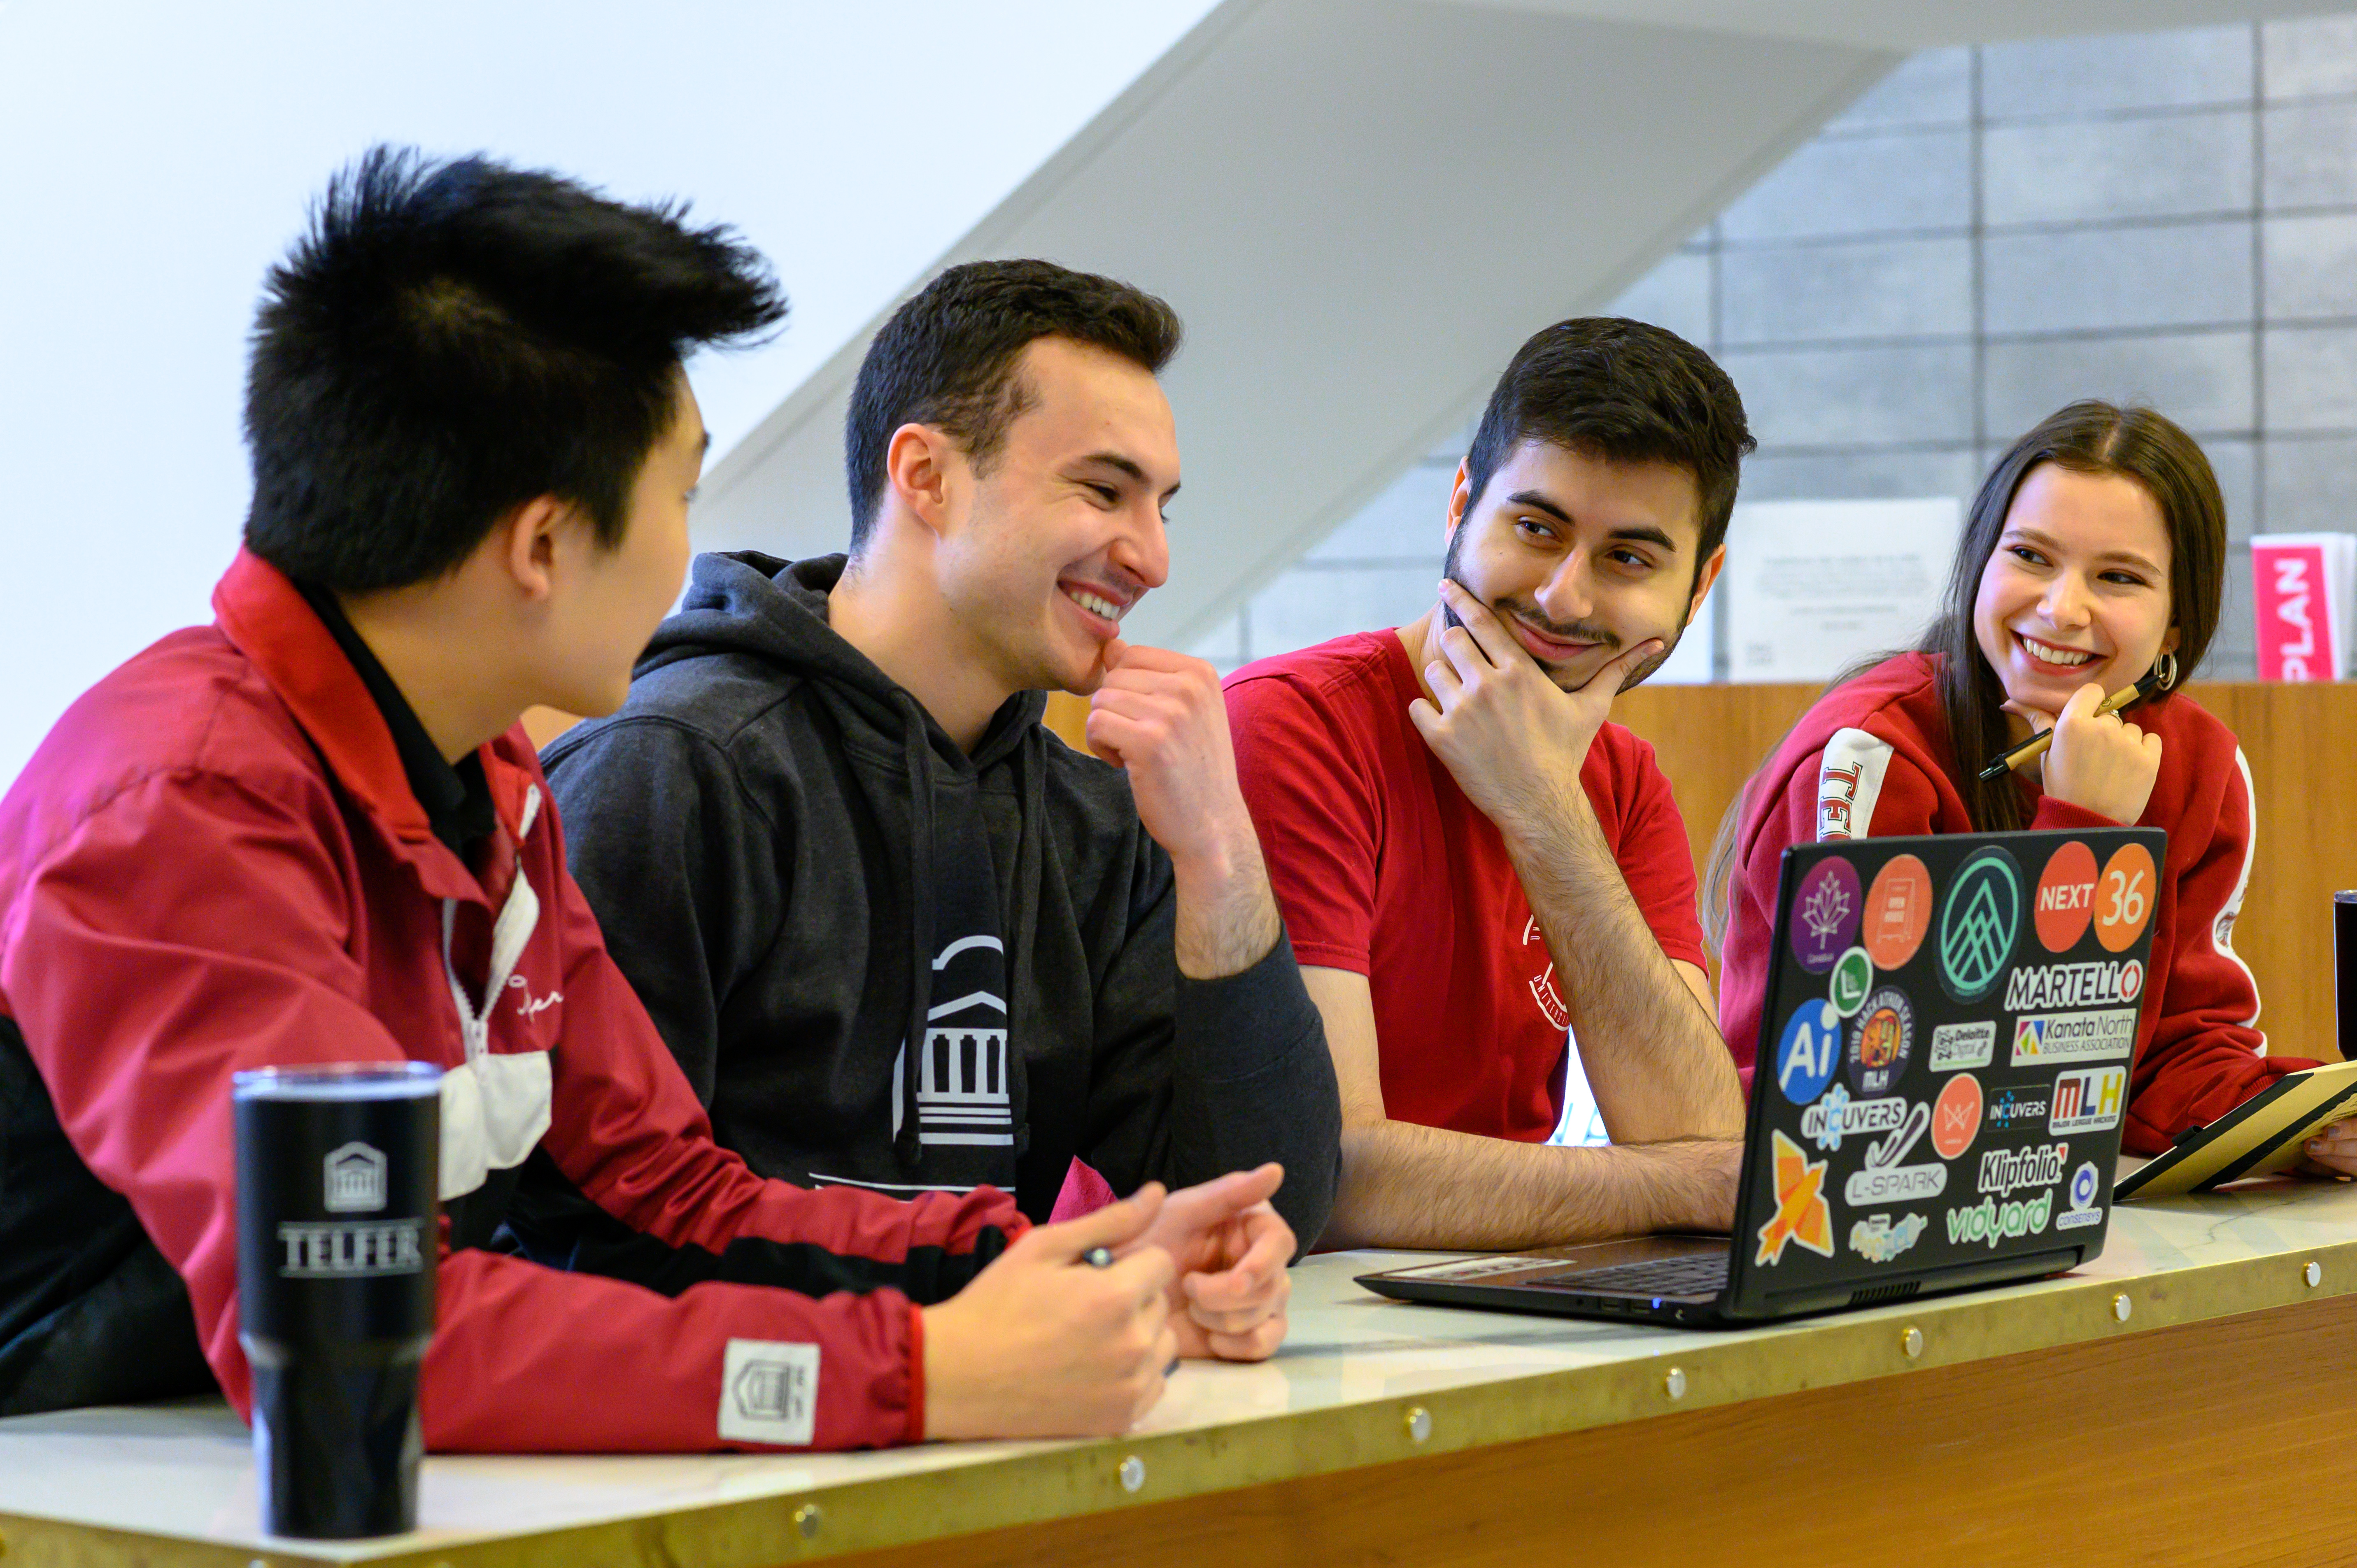 4 Telfer students smiling at one another taking a break from studying while sitting at a desk